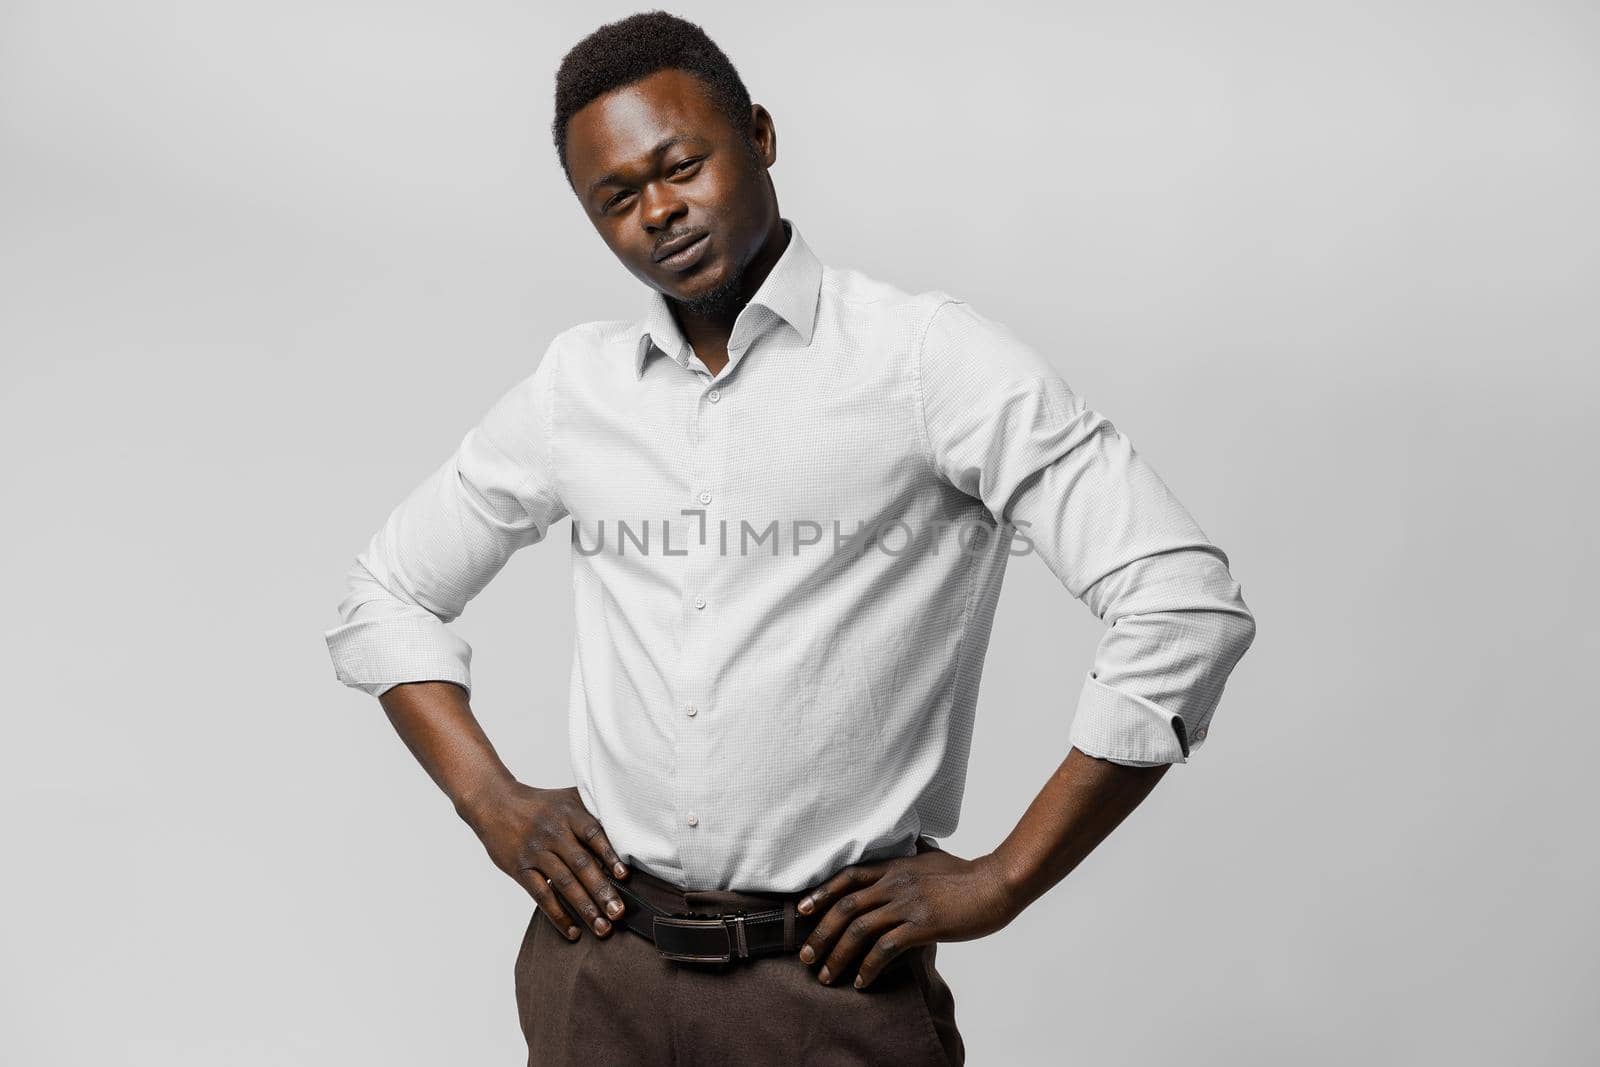 Handsome black african puts his hands on his hips. Business portrait in studio on white background. Online business.